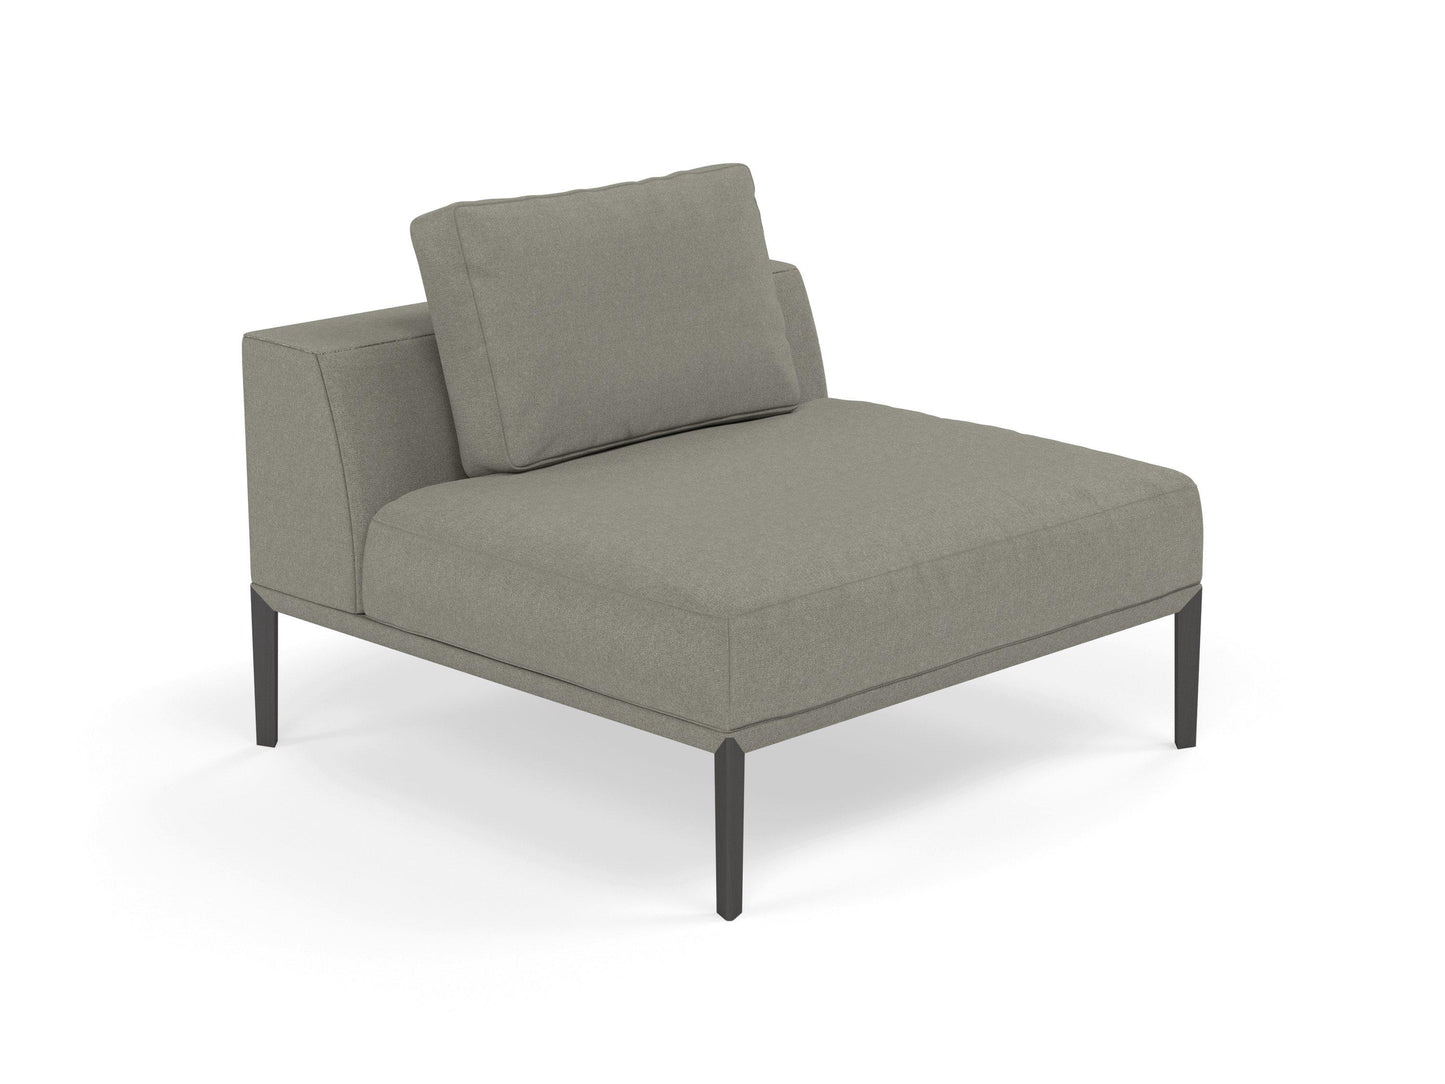 Modern Armchair 1 Seater Sofa without armrests in Silver Grey Fabric-Distinct Designs (London) Ltd